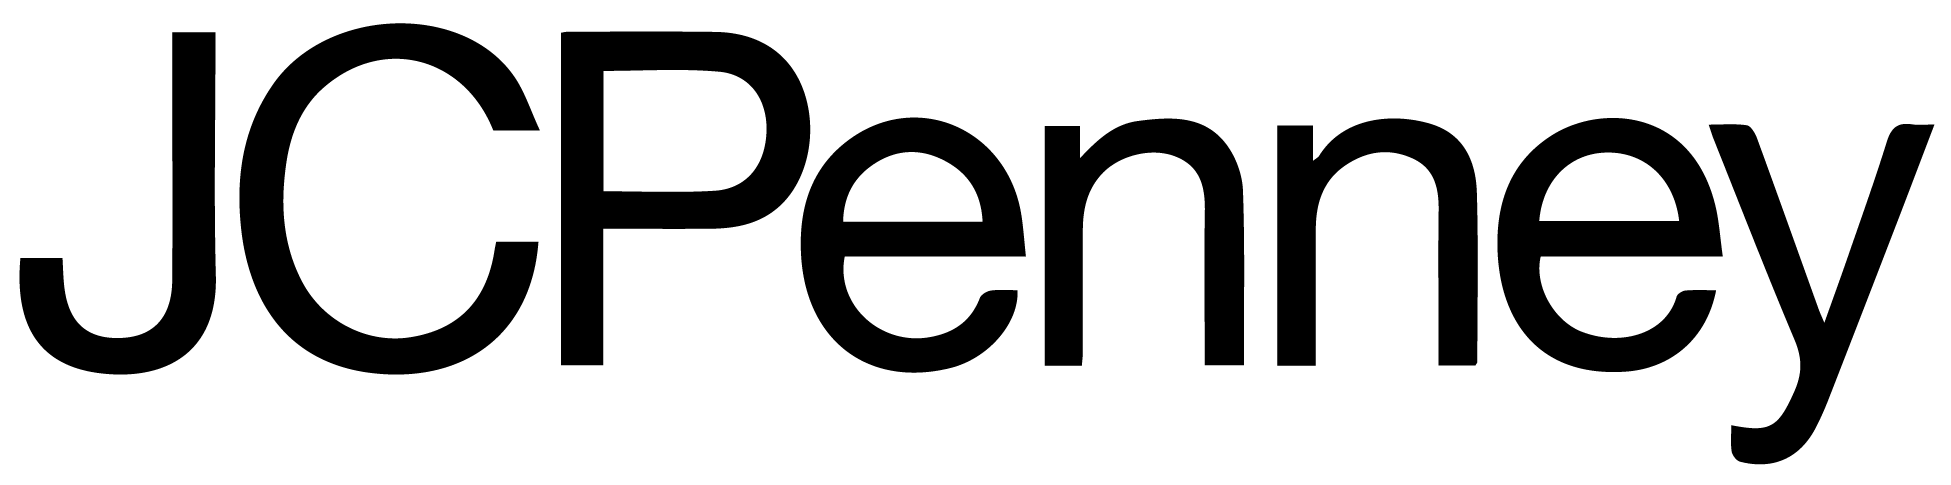 JCPenney_logo.png